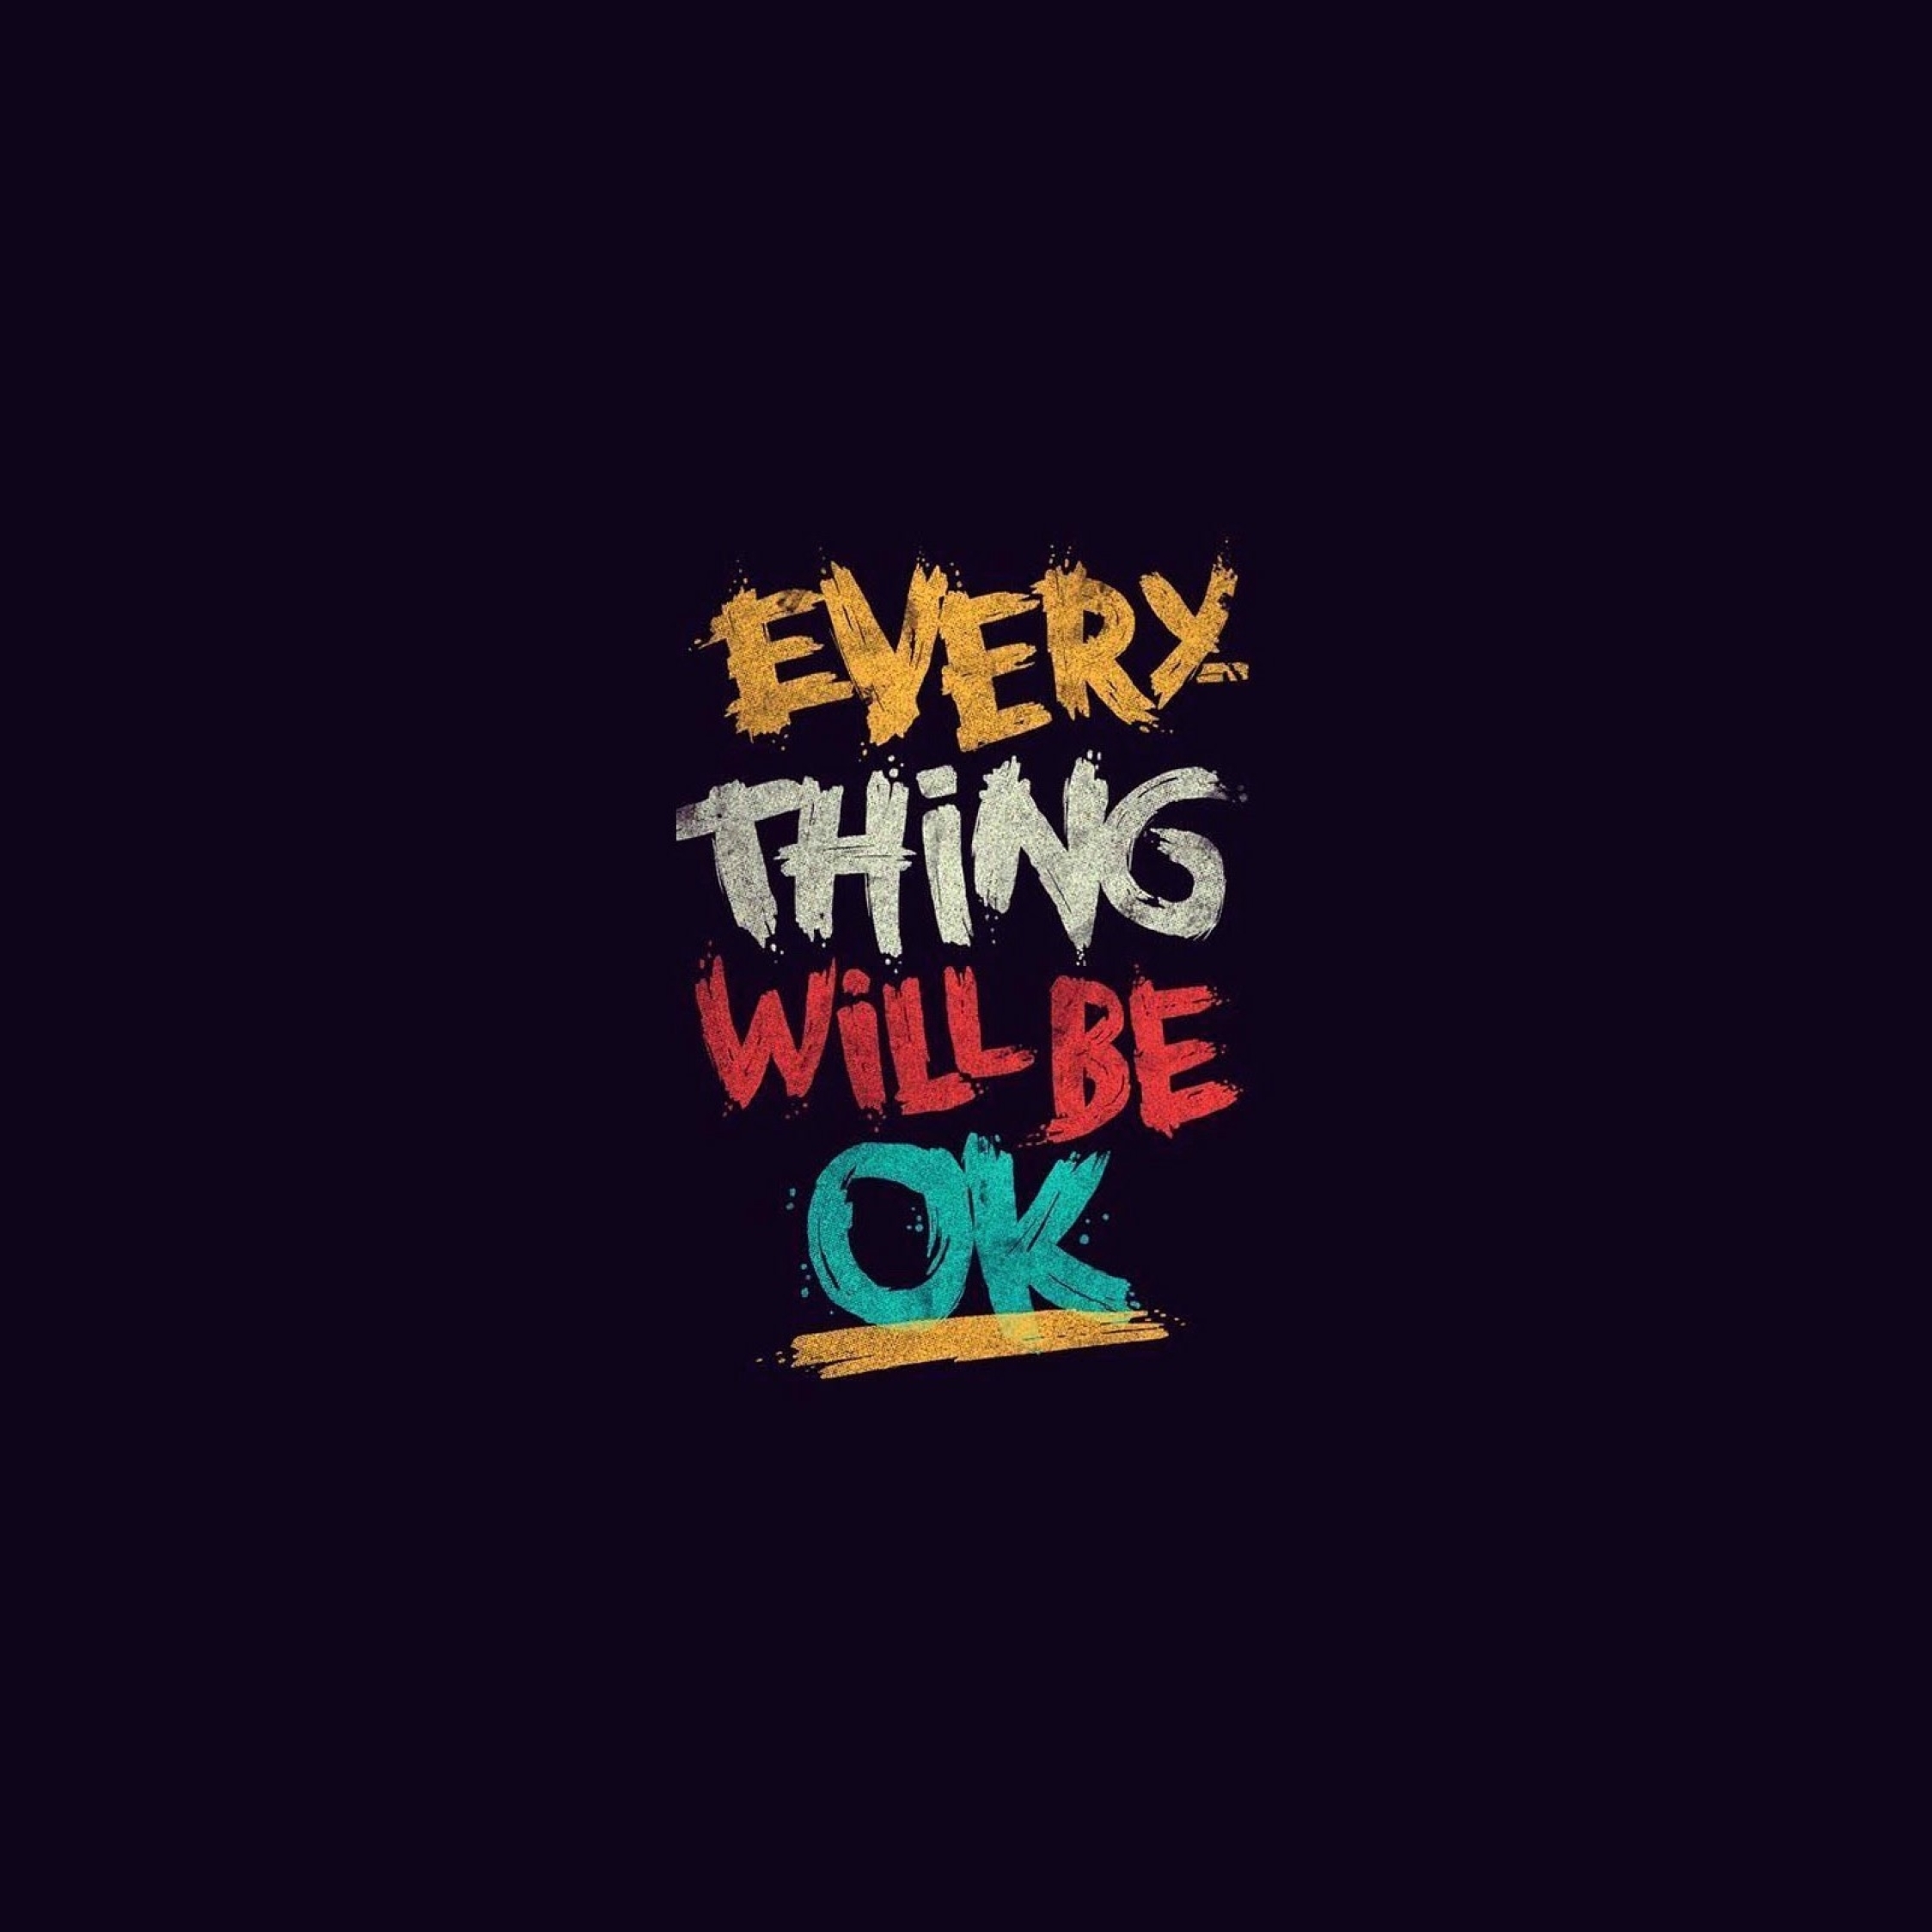 Top 100+ Images everything will be ok wallpaper Latest